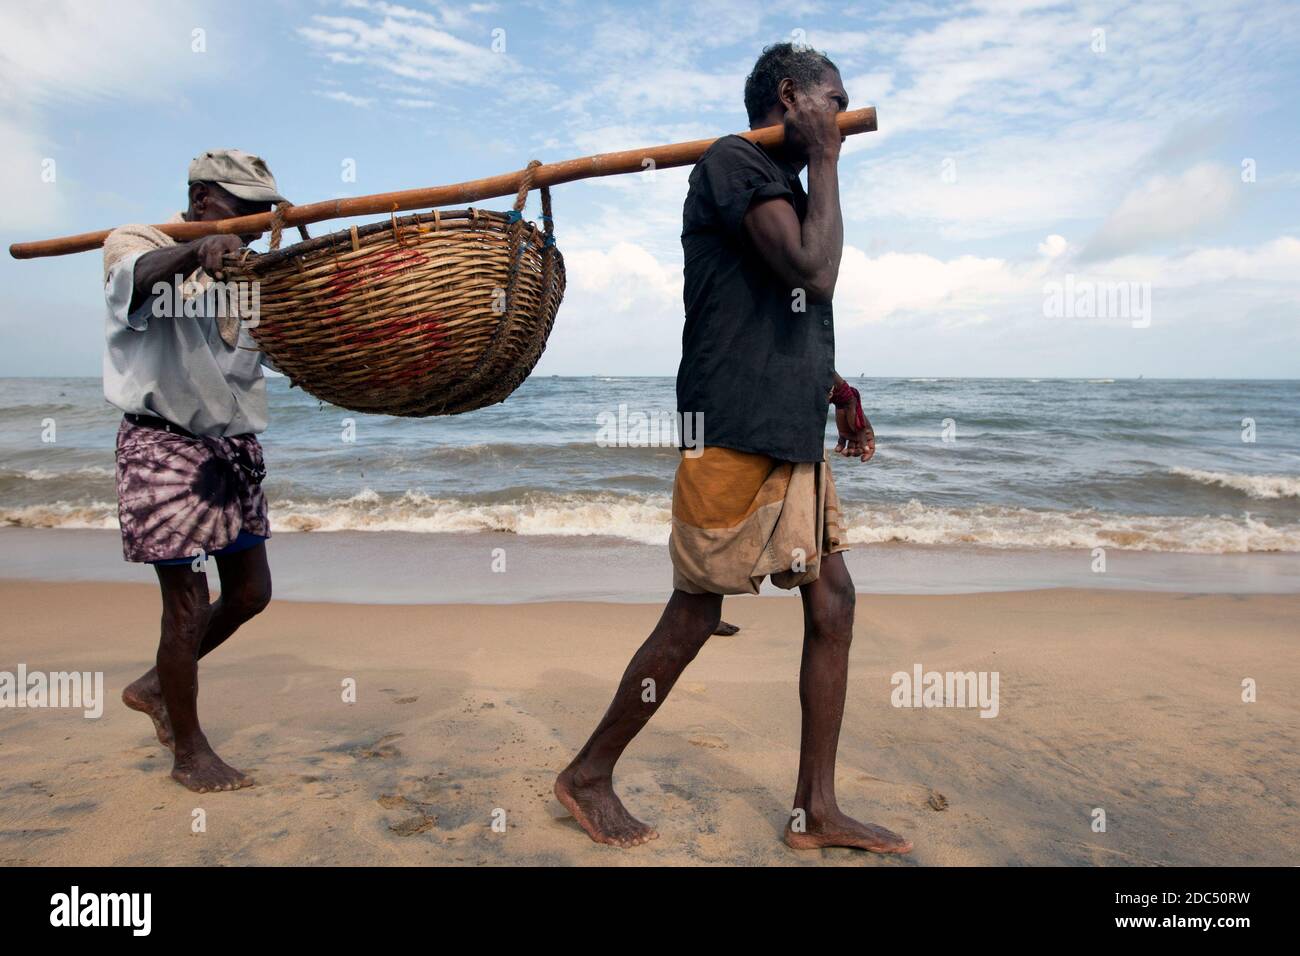 https://c8.alamy.com/comp/2DC50RW/fishermen-carry-their-catch-of-fish-in-a-basket-towards-the-negombo-fish-market-for-sale-negombo-is-located-on-the-west-coast-of-sri-lanka-2DC50RW.jpg